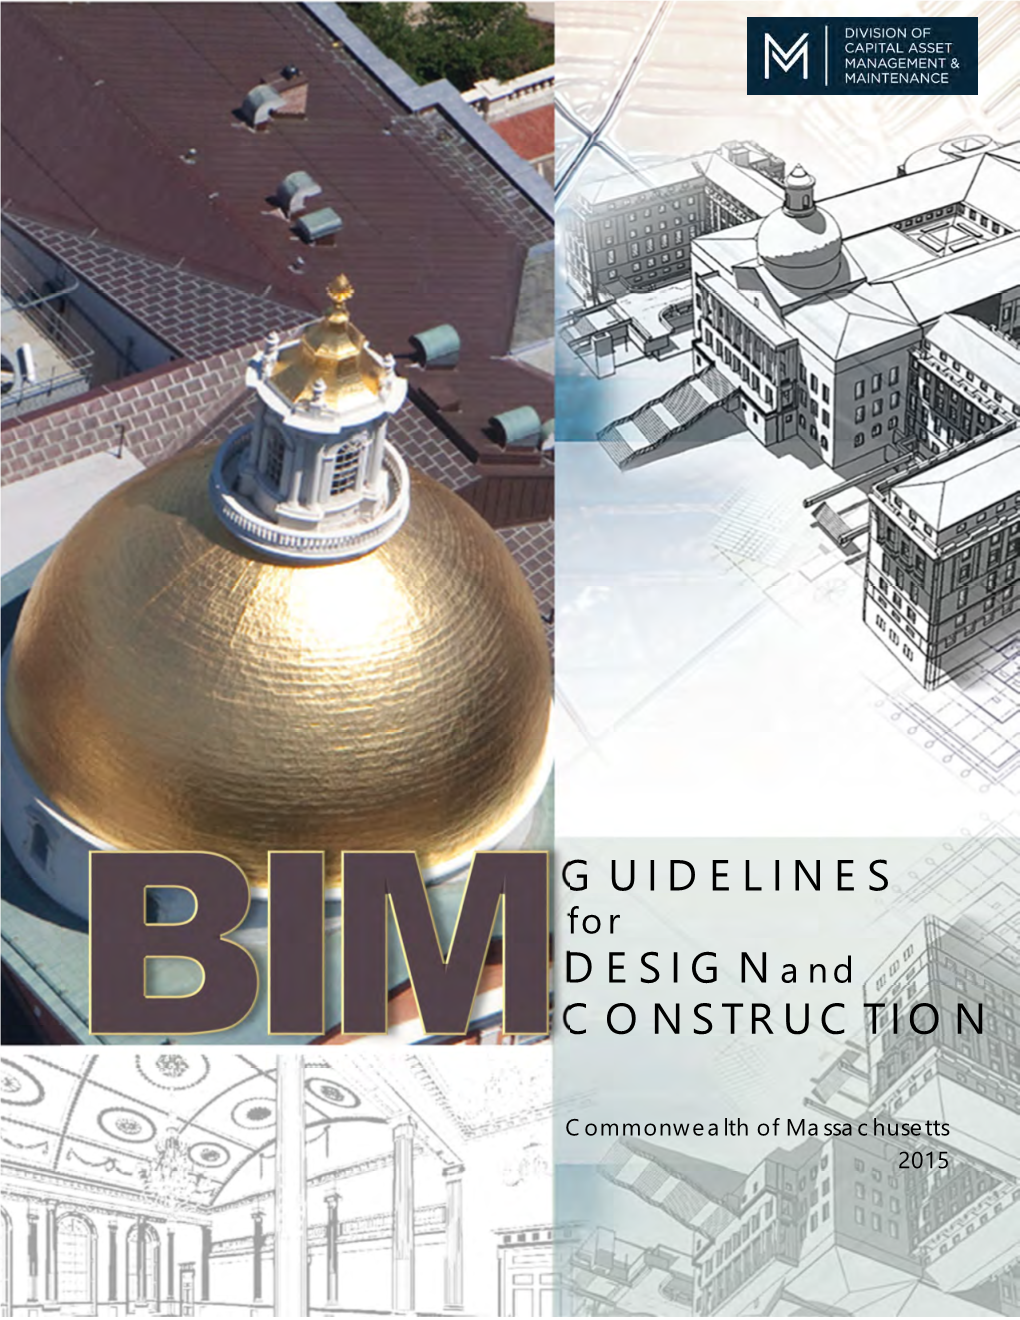 GUIDELINES DESIGN and CONSTRUCTION